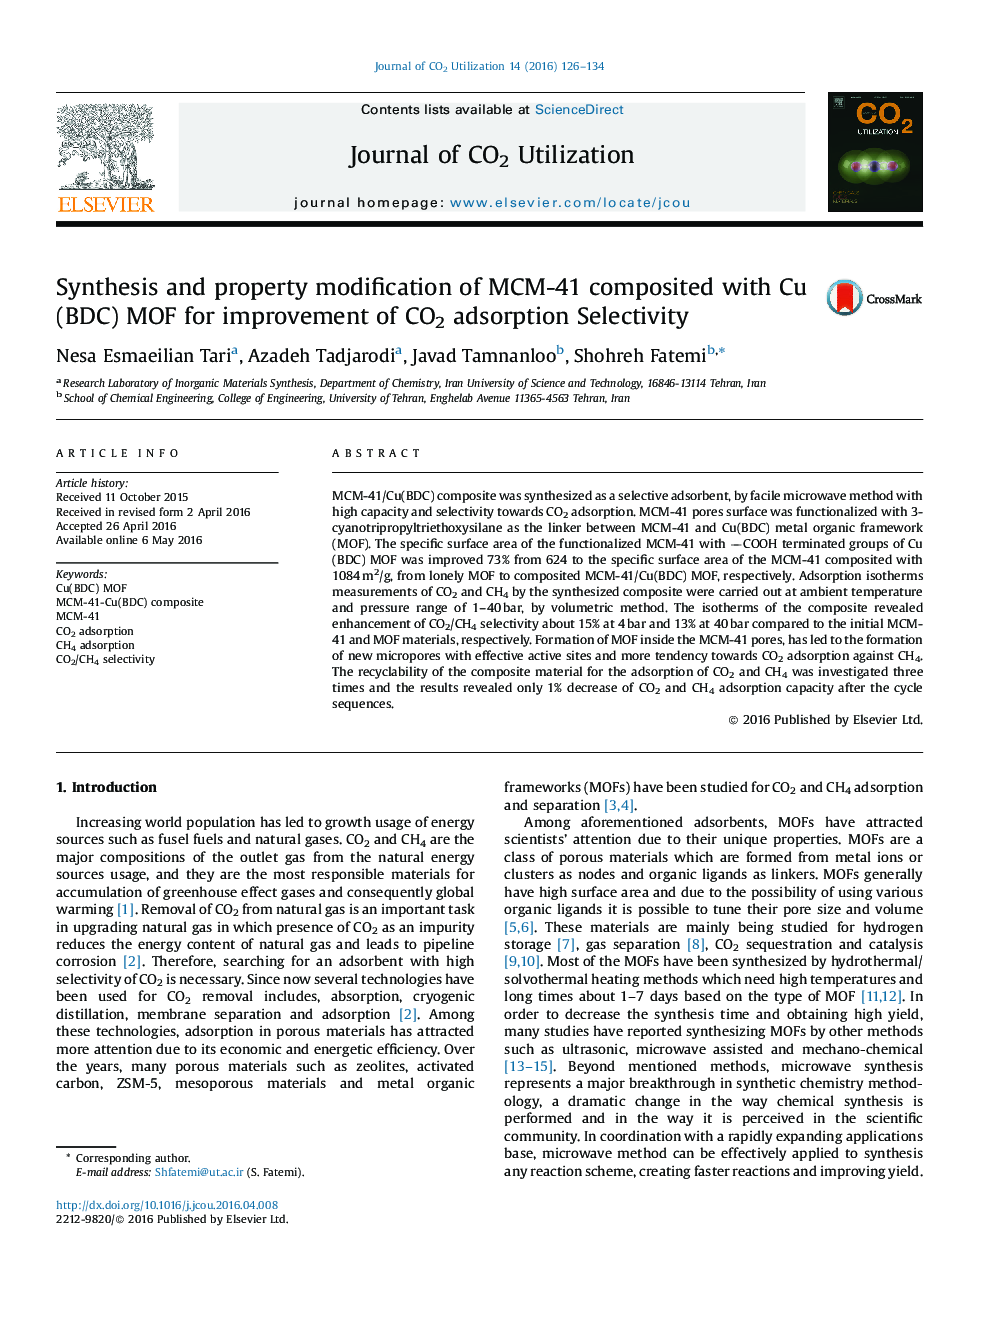 Synthesis and property modification of MCM-41 composited with Cu(BDC) MOF for improvement of CO2 adsorption Selectivity